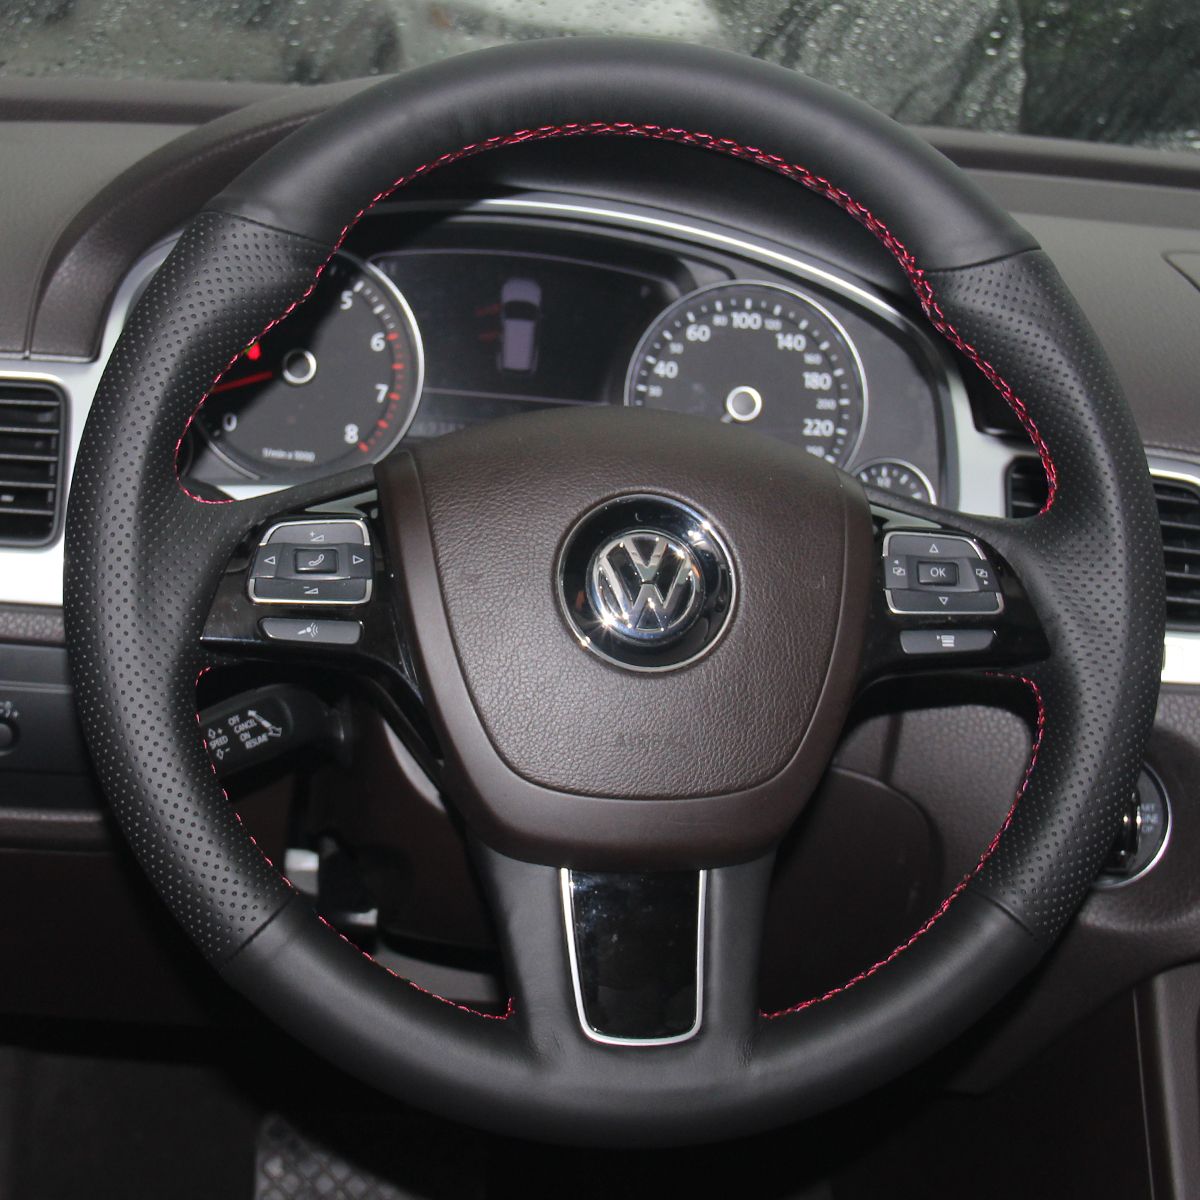 MEWANT Hand Stitch Black Leather Car Steering Wheel Cover for Volkswagen VW Touareg 2010-2018